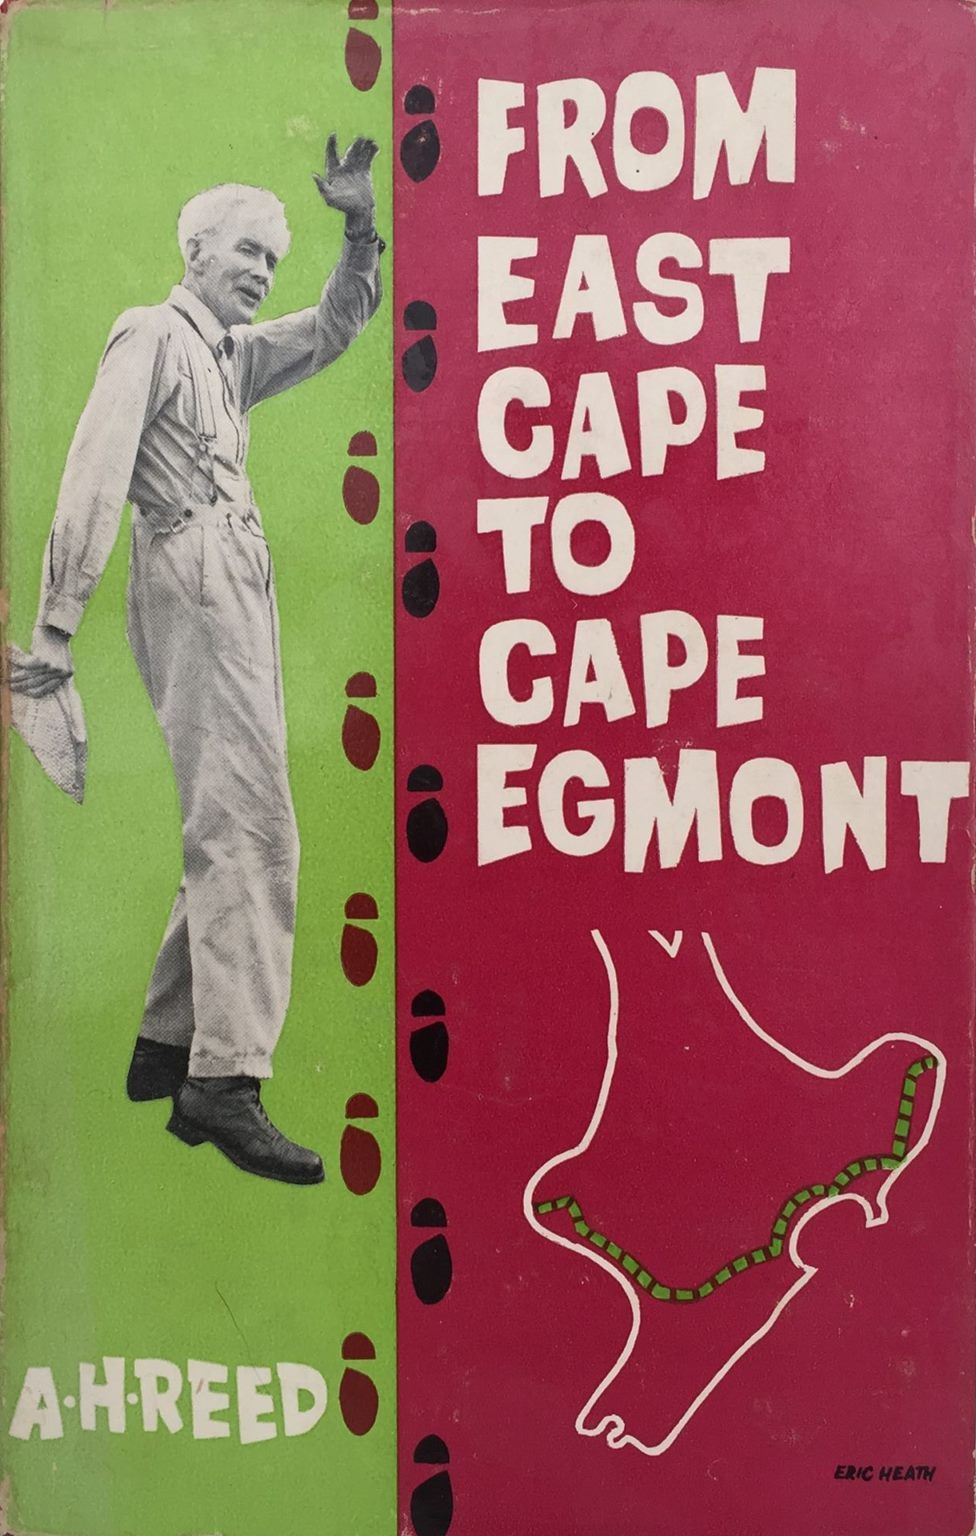 FROM EAST CAPE TO CAPE EGMONT